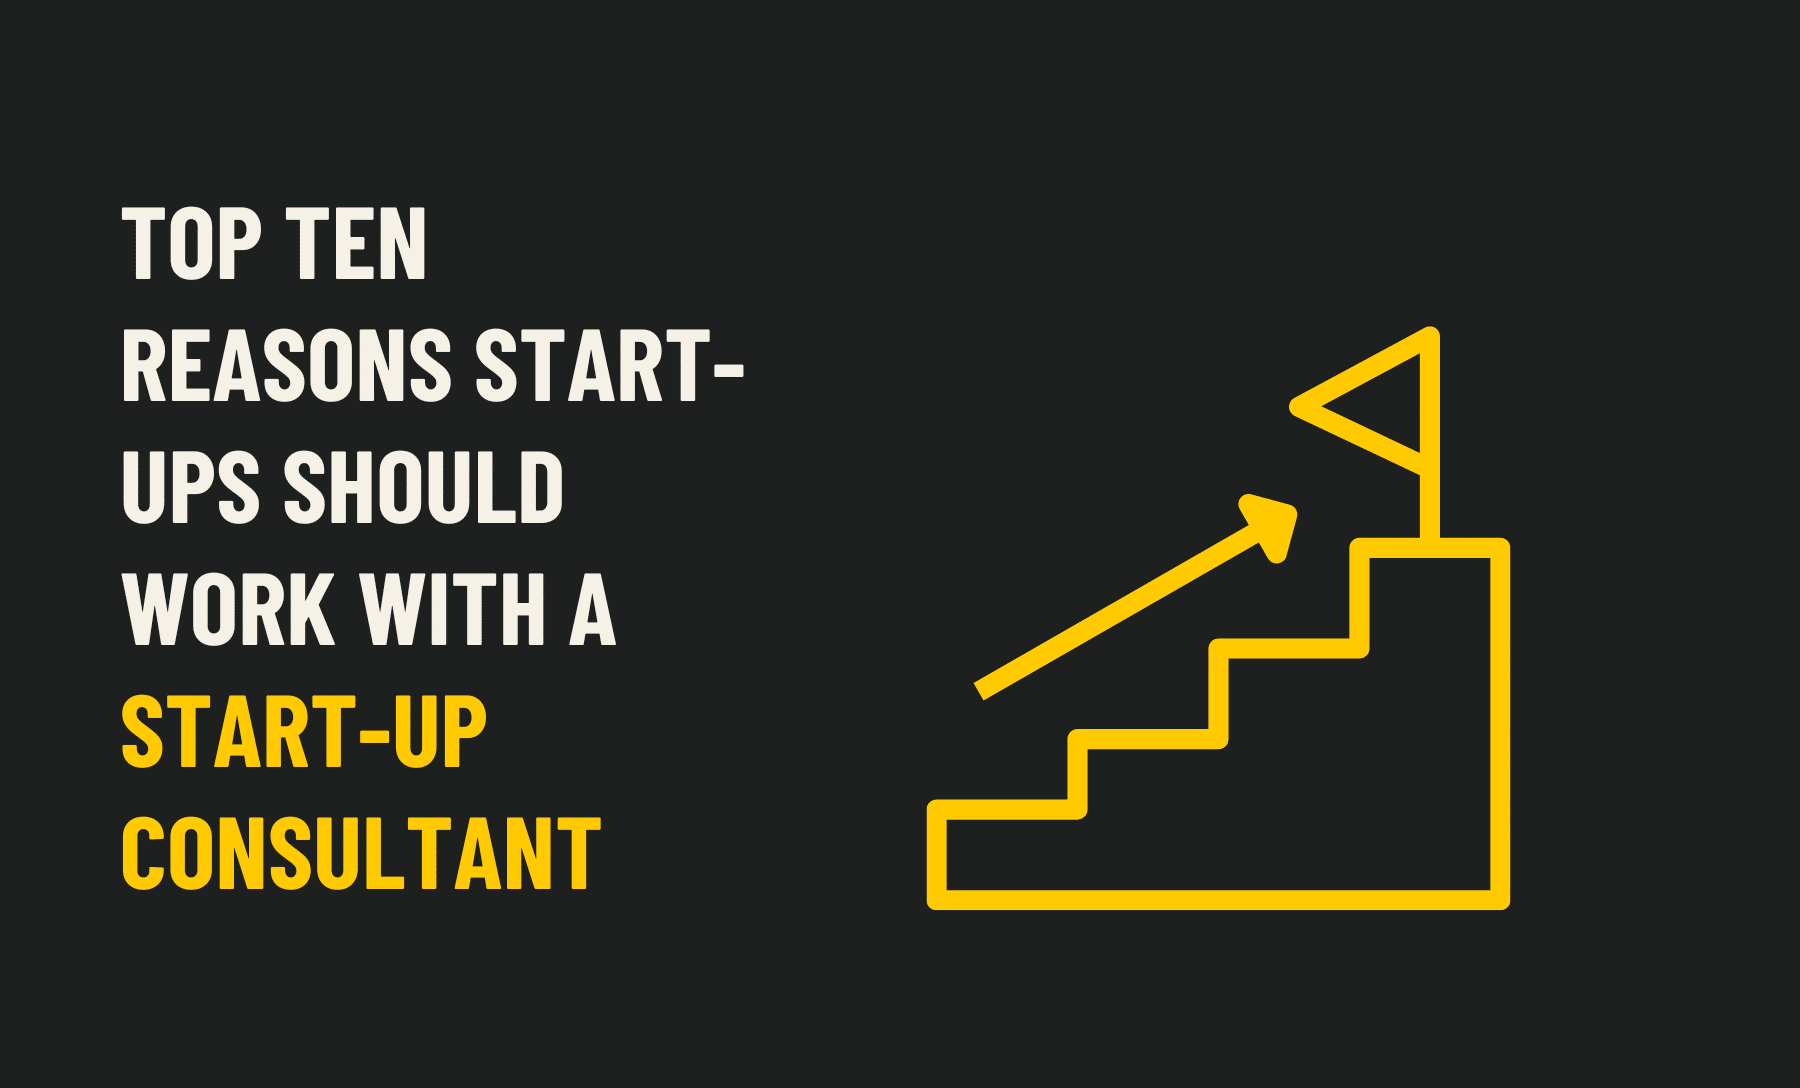 Top Ten Reasons Start-ups Should Work with a Start-up Consultant